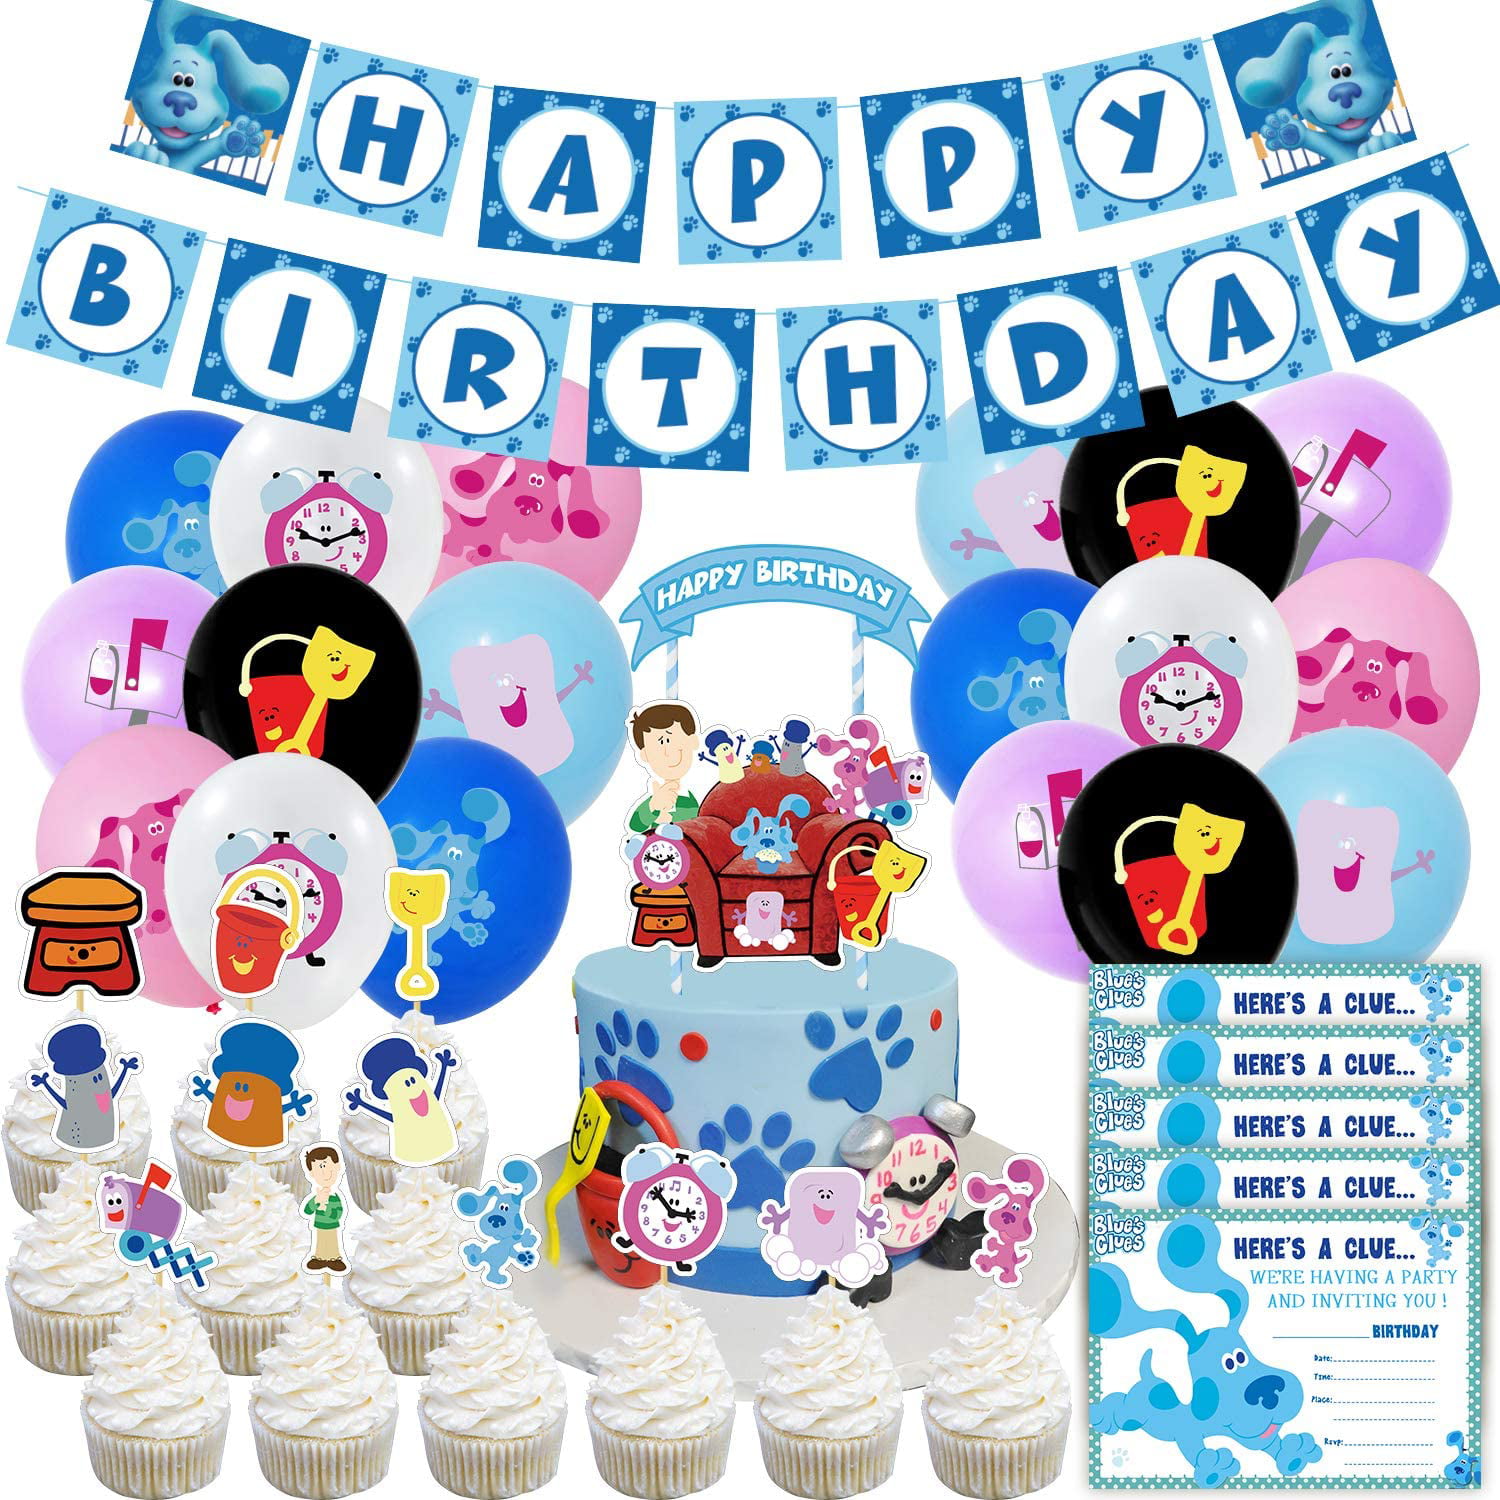 3 Packages Perfect Party Solutions® PARTY Invitations Cupcake Theme 8 x 3 = 24 